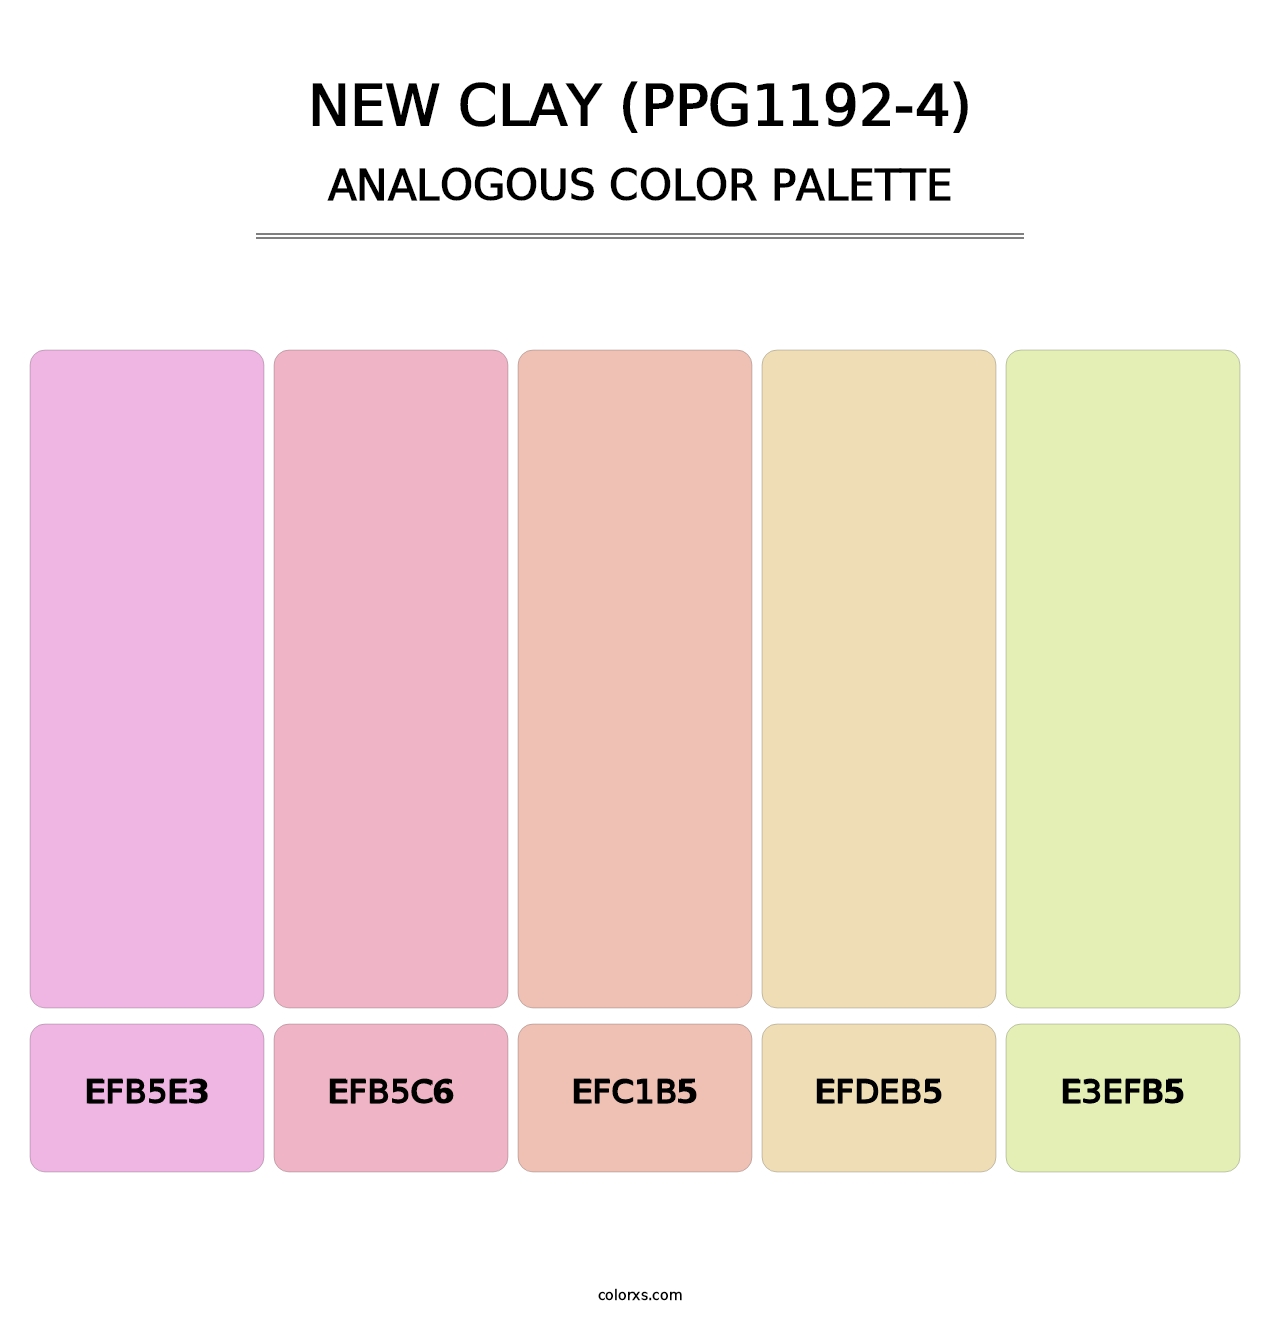 New Clay (PPG1192-4) - Analogous Color Palette